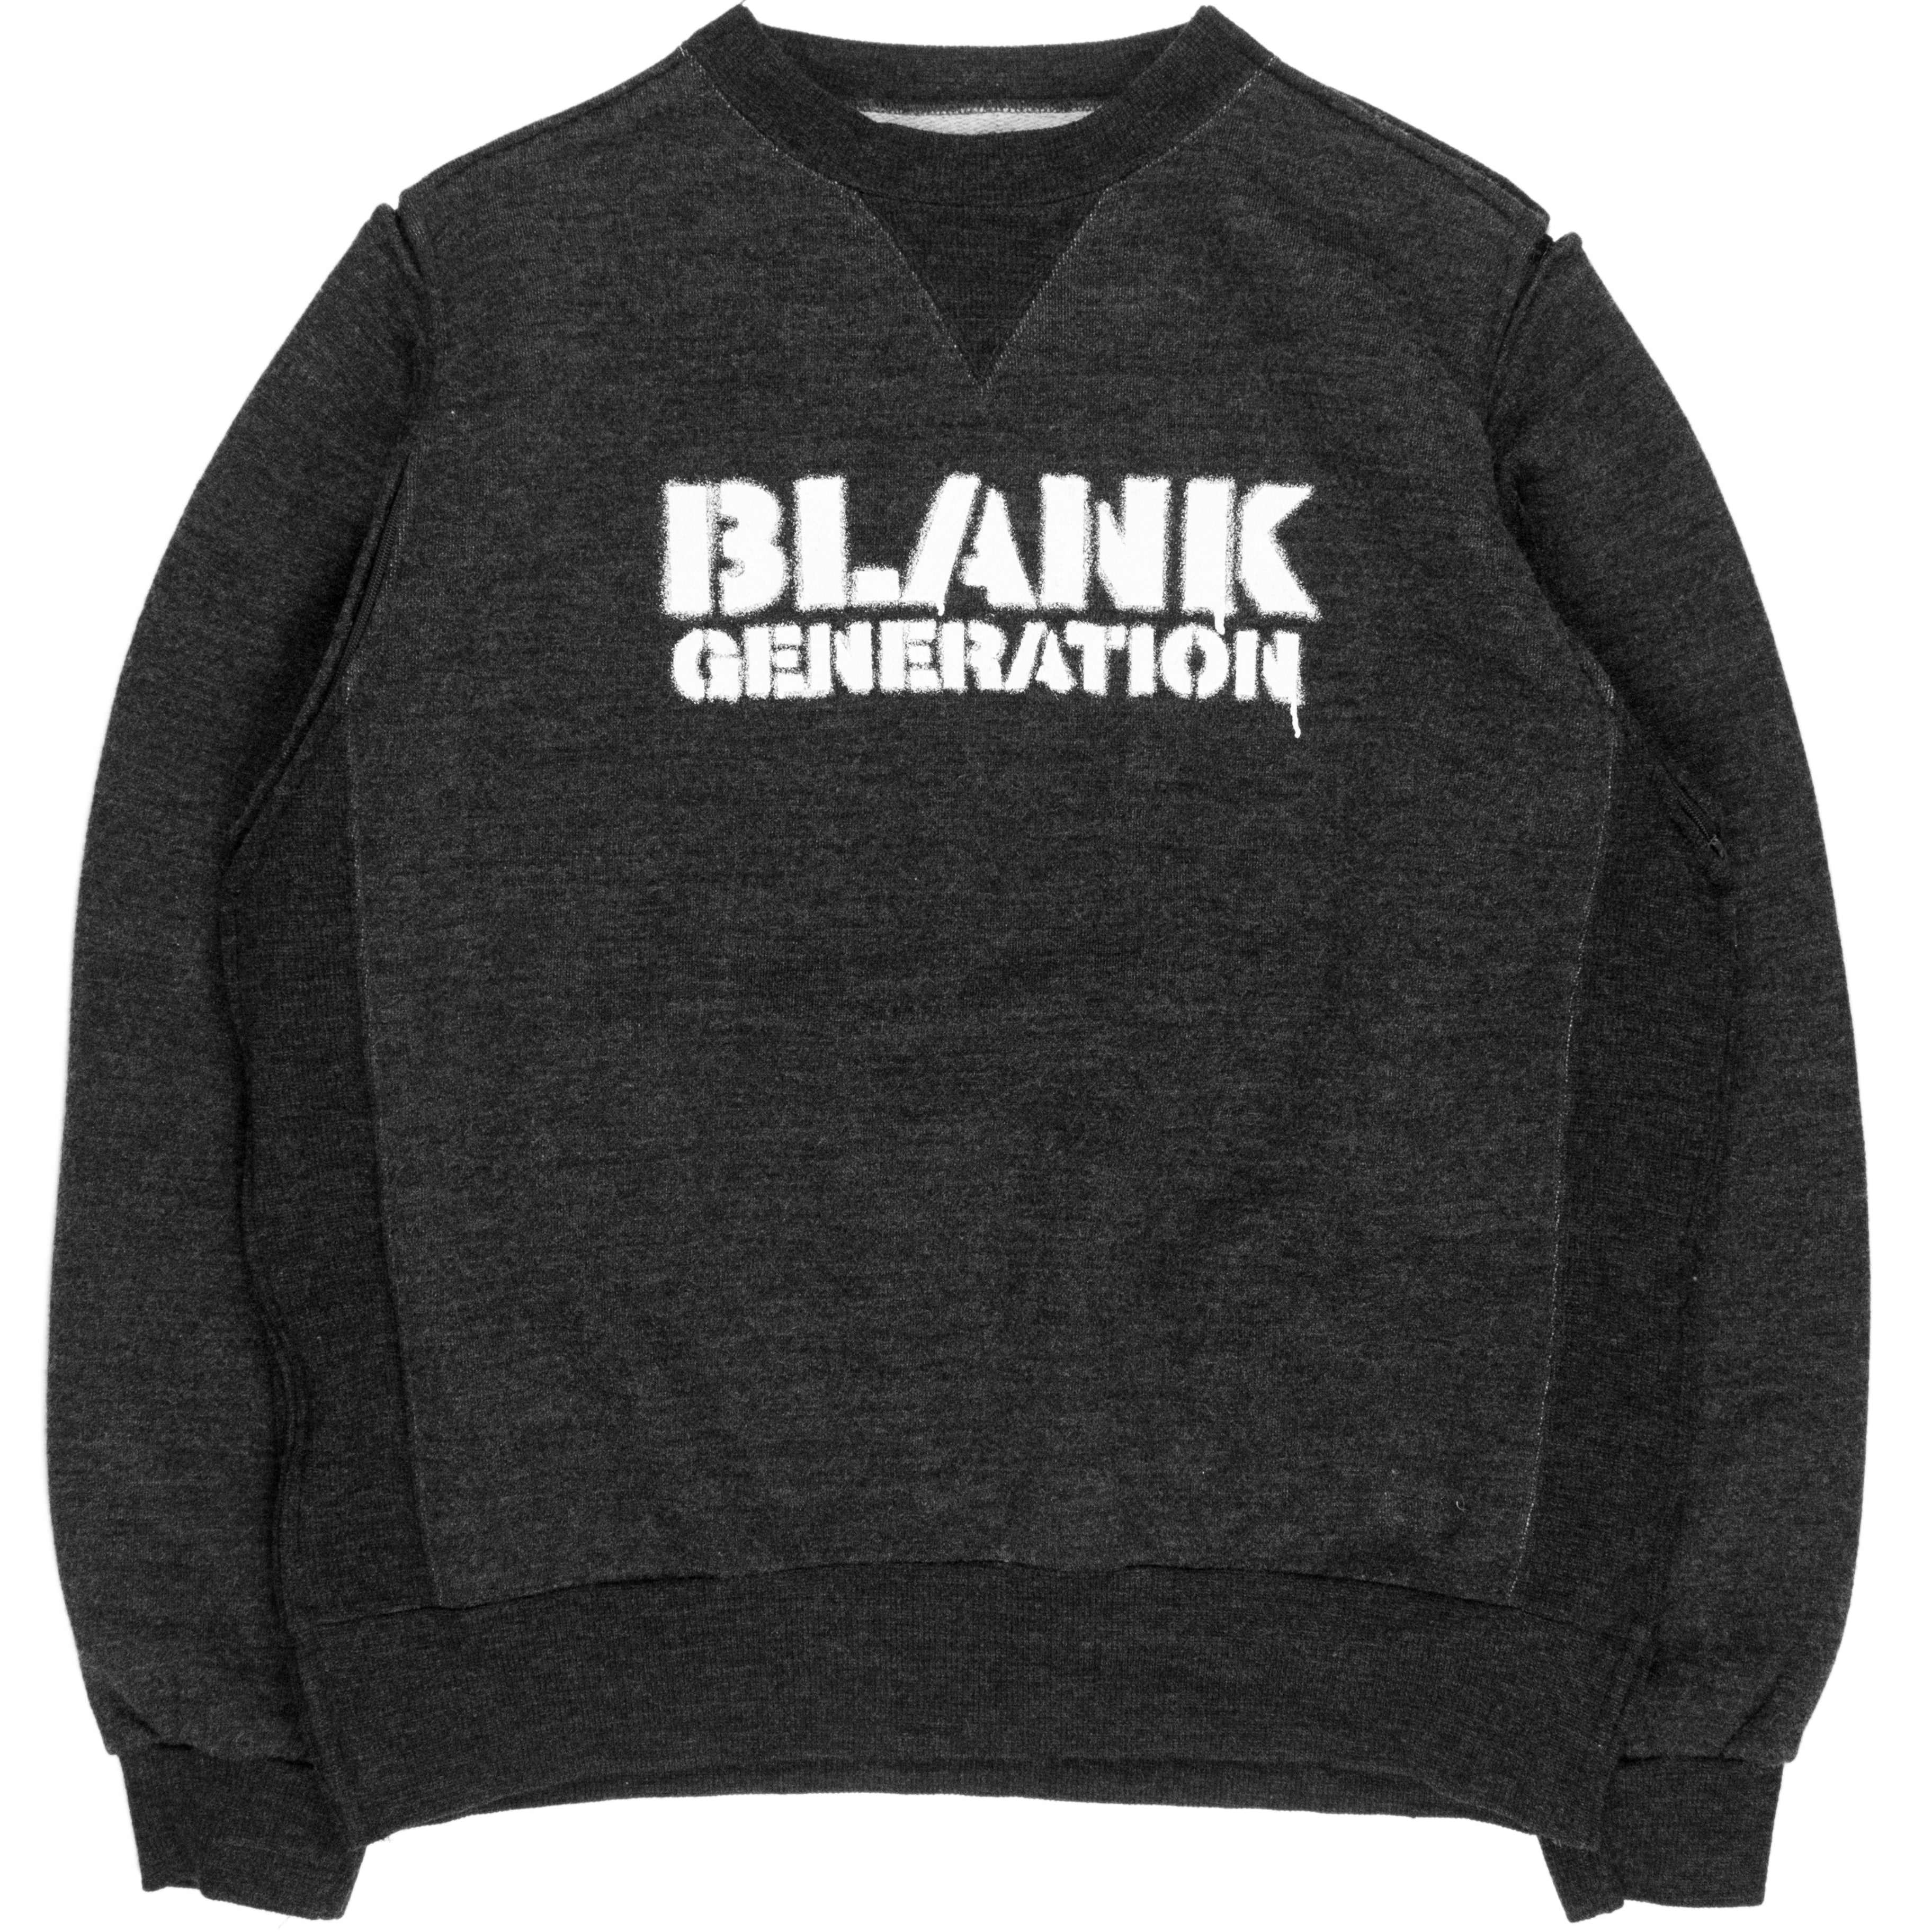 Undercover Blank Generation Sweater - AW99 “Ambivalence” - SILVER